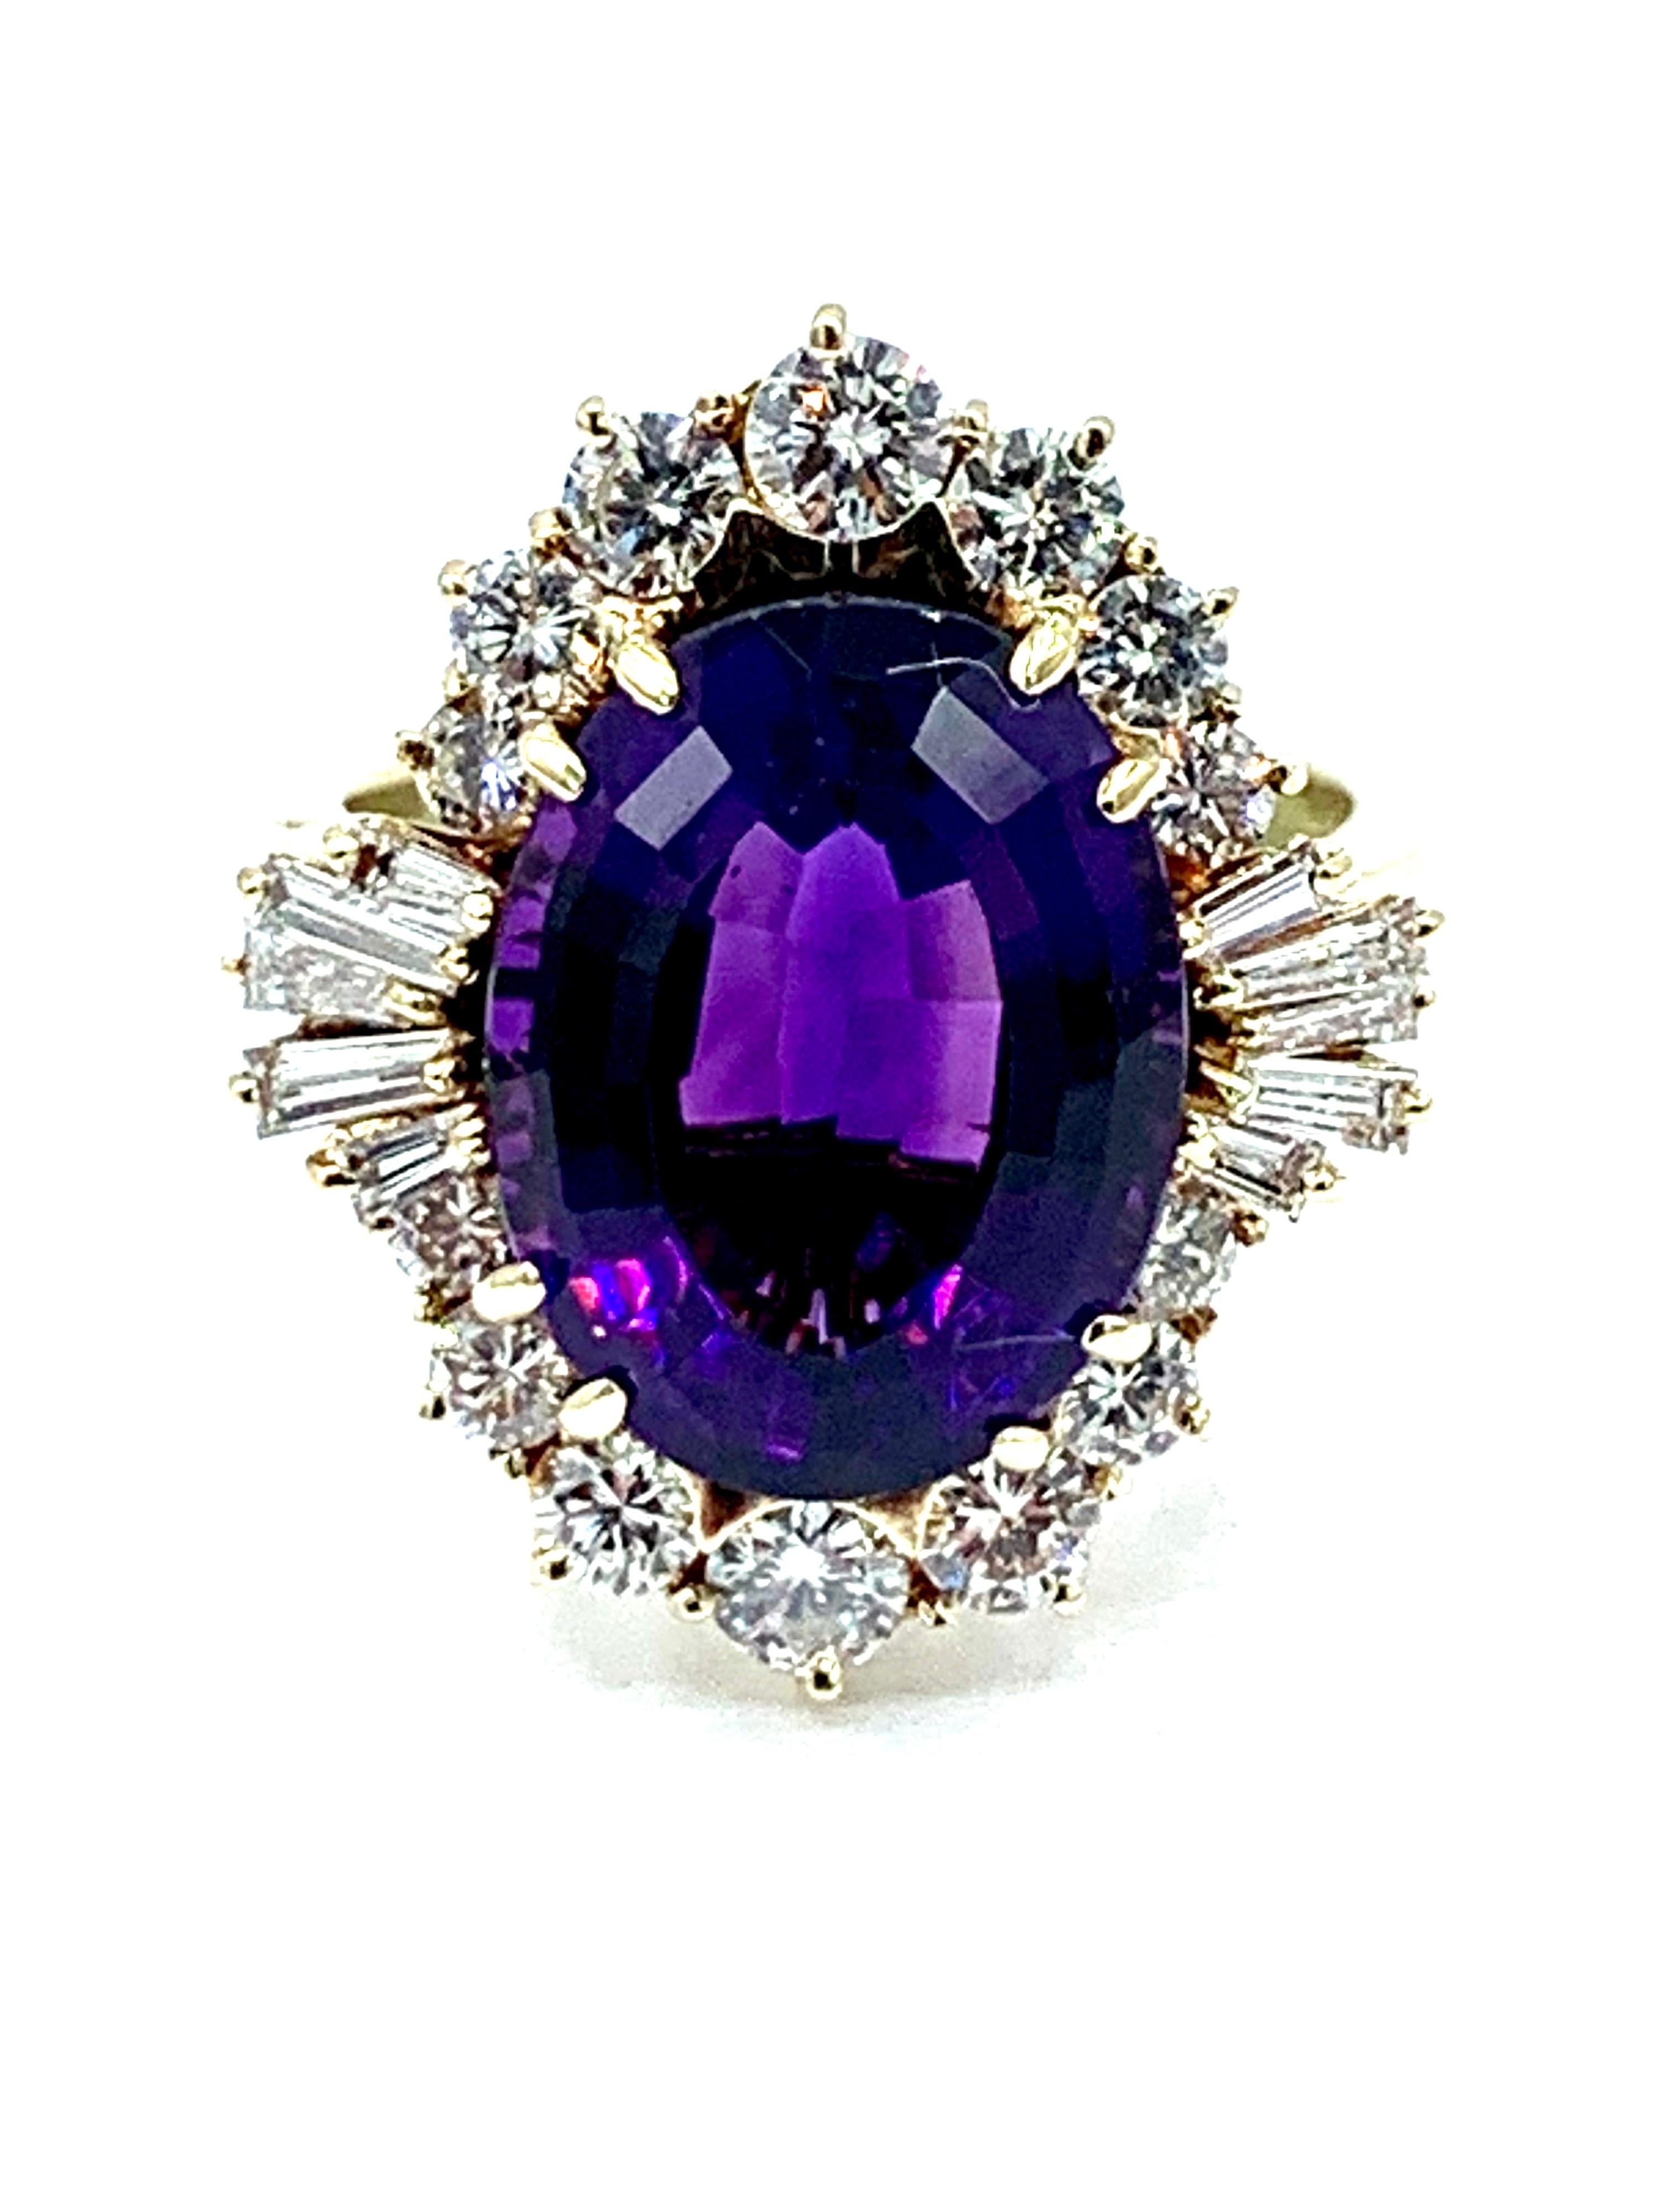 A rich purple 6.51 carat oval Amethyst cocktail ring.  The Amethyst is set in eight prongs, surrounded by a single row of Diamonds consisting of round brilliant cut and baguettes.  The Diamonds weigh 0.96 carats, and are graded G color, VS clarity. 